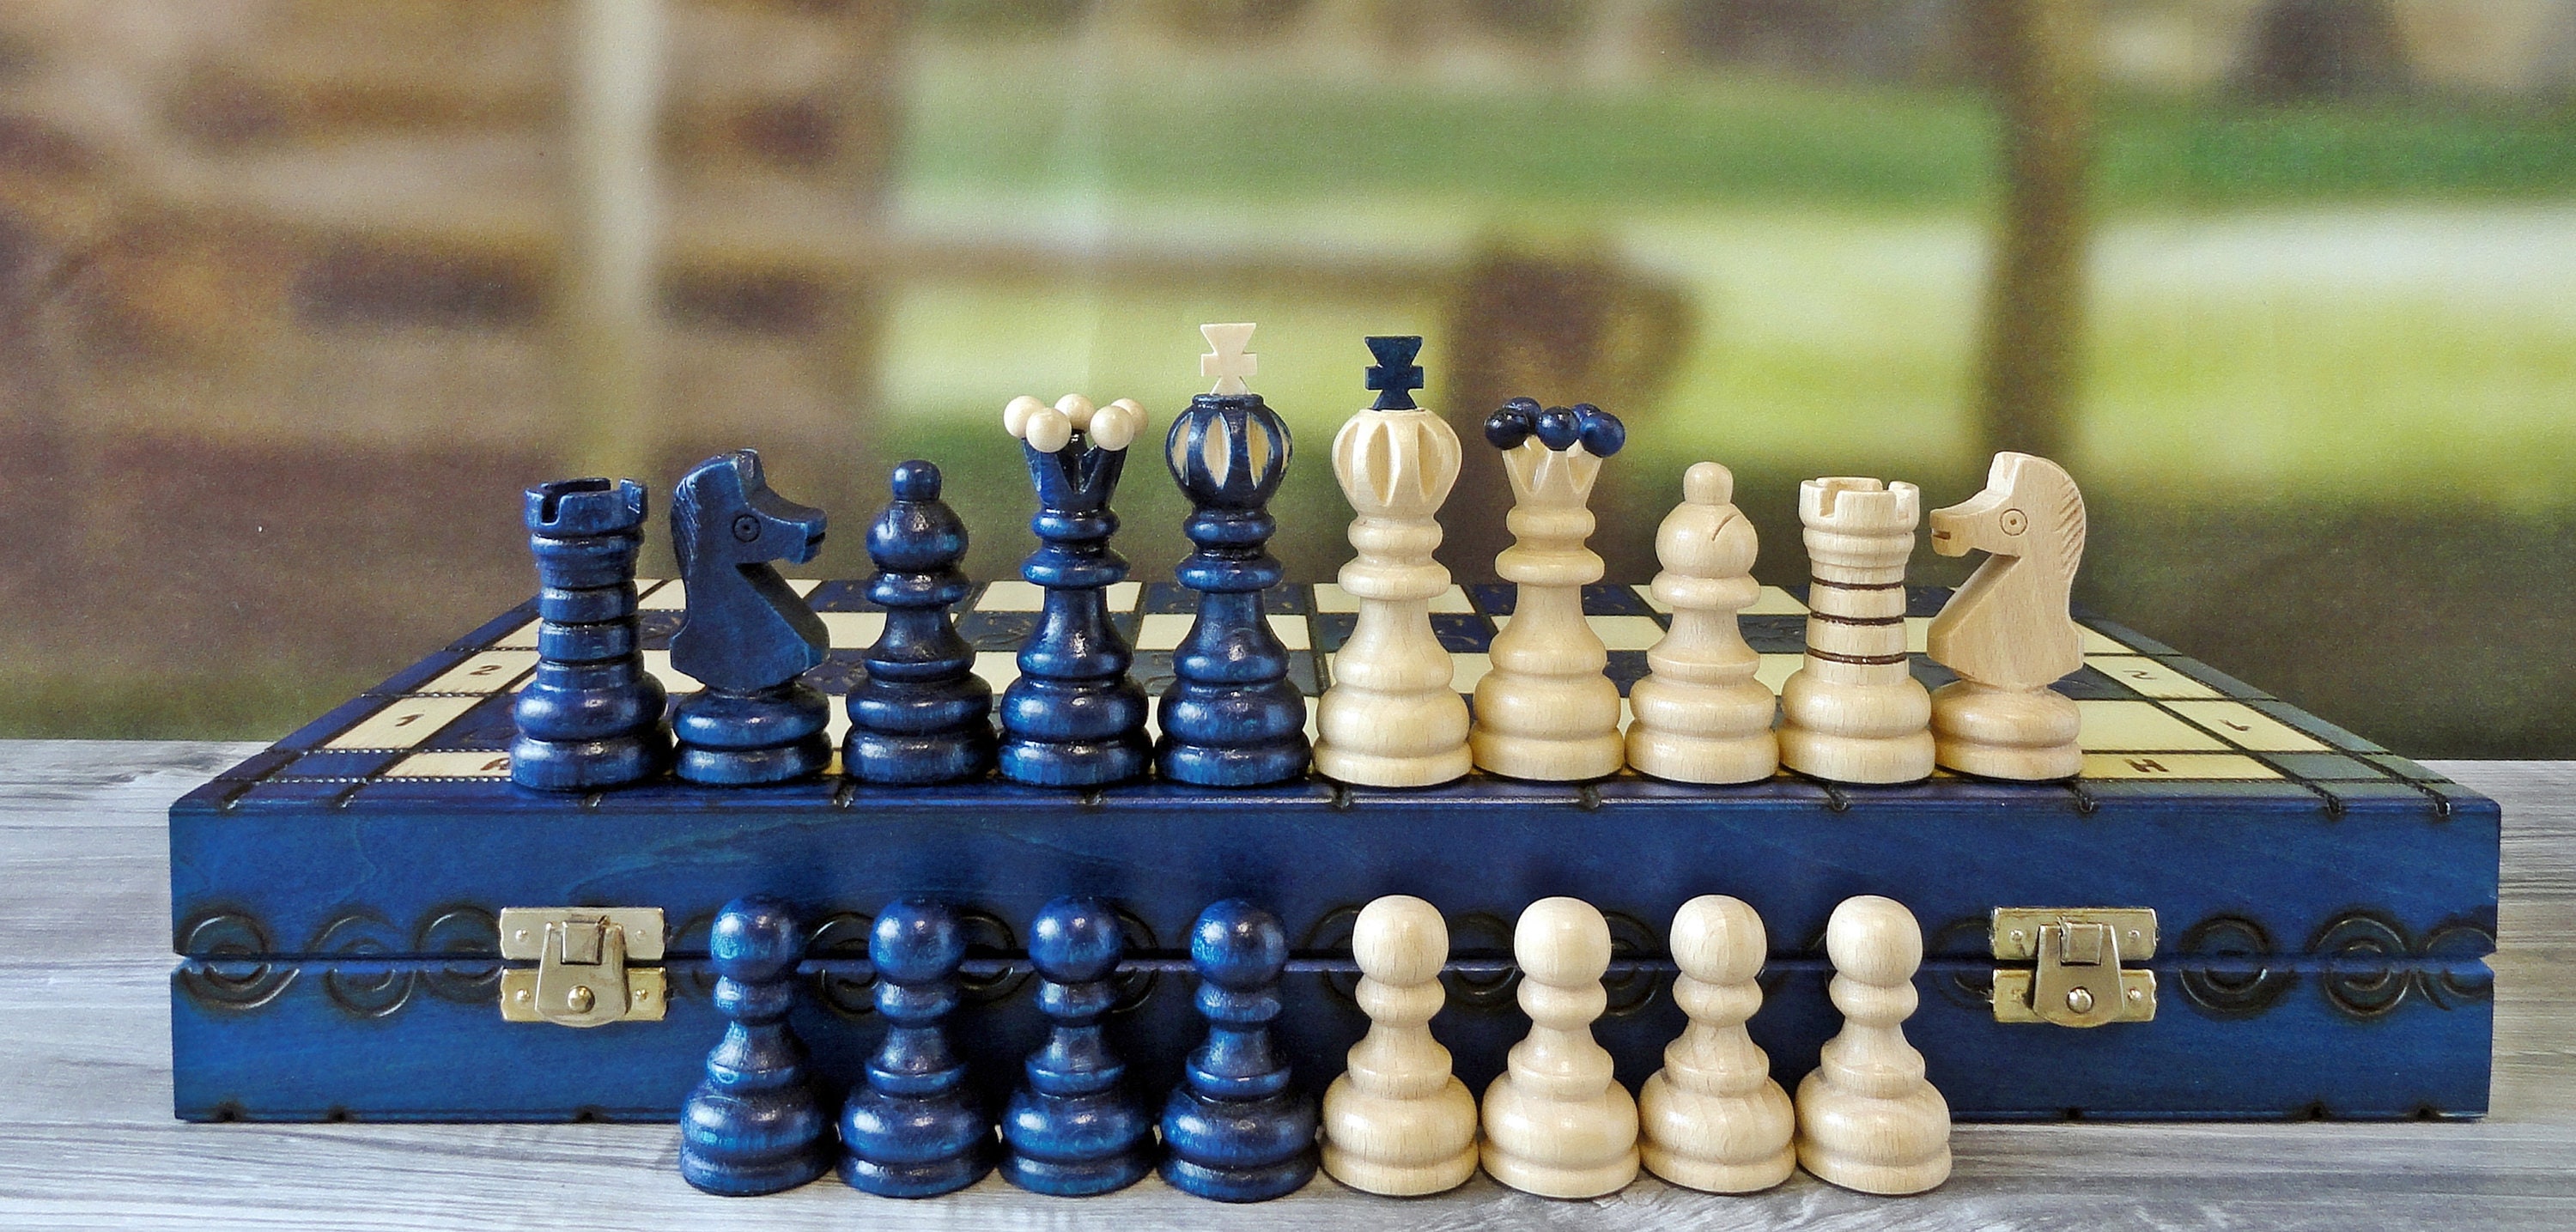 Chess Set 42 x 42 cm 165 x 165 in in Blue Color Large -  Portugal